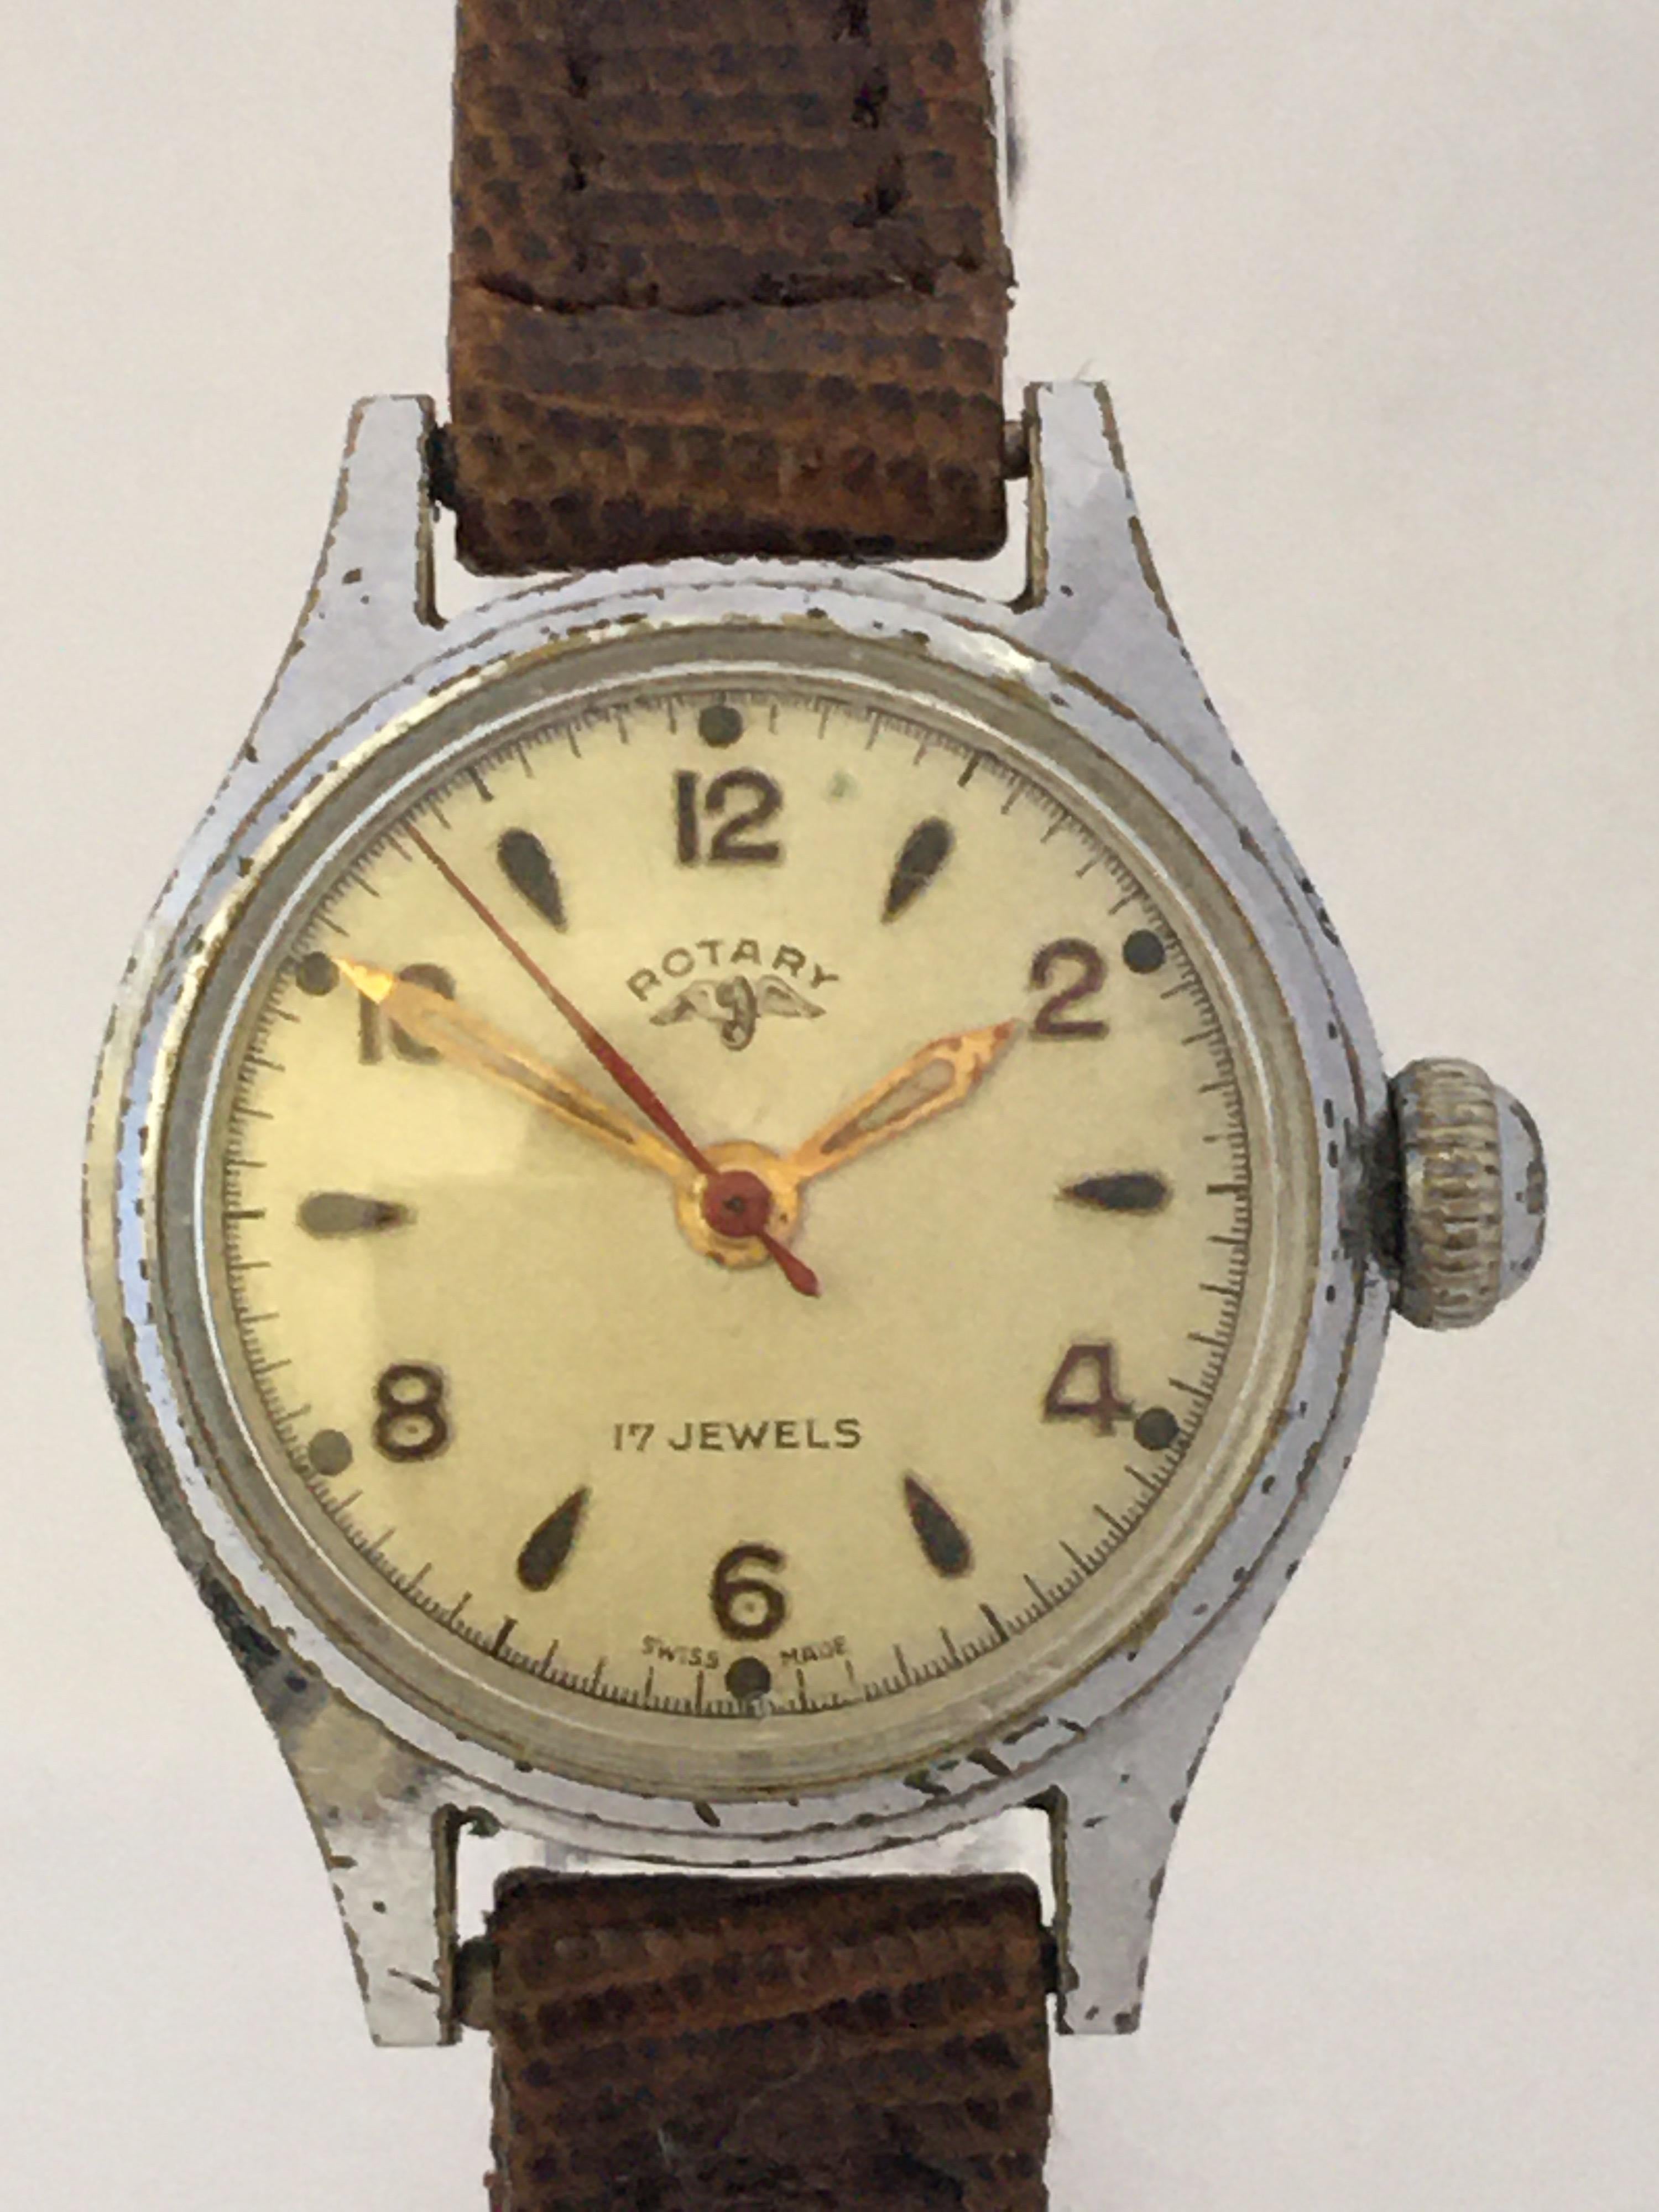 This beautiful pre-owned hand winding ladies watch is in good working condition and it is running well. Visible signs of ageing and wear with light scratches and tarnishes on the silver plated watch case as shown. 

Please study the images carefully